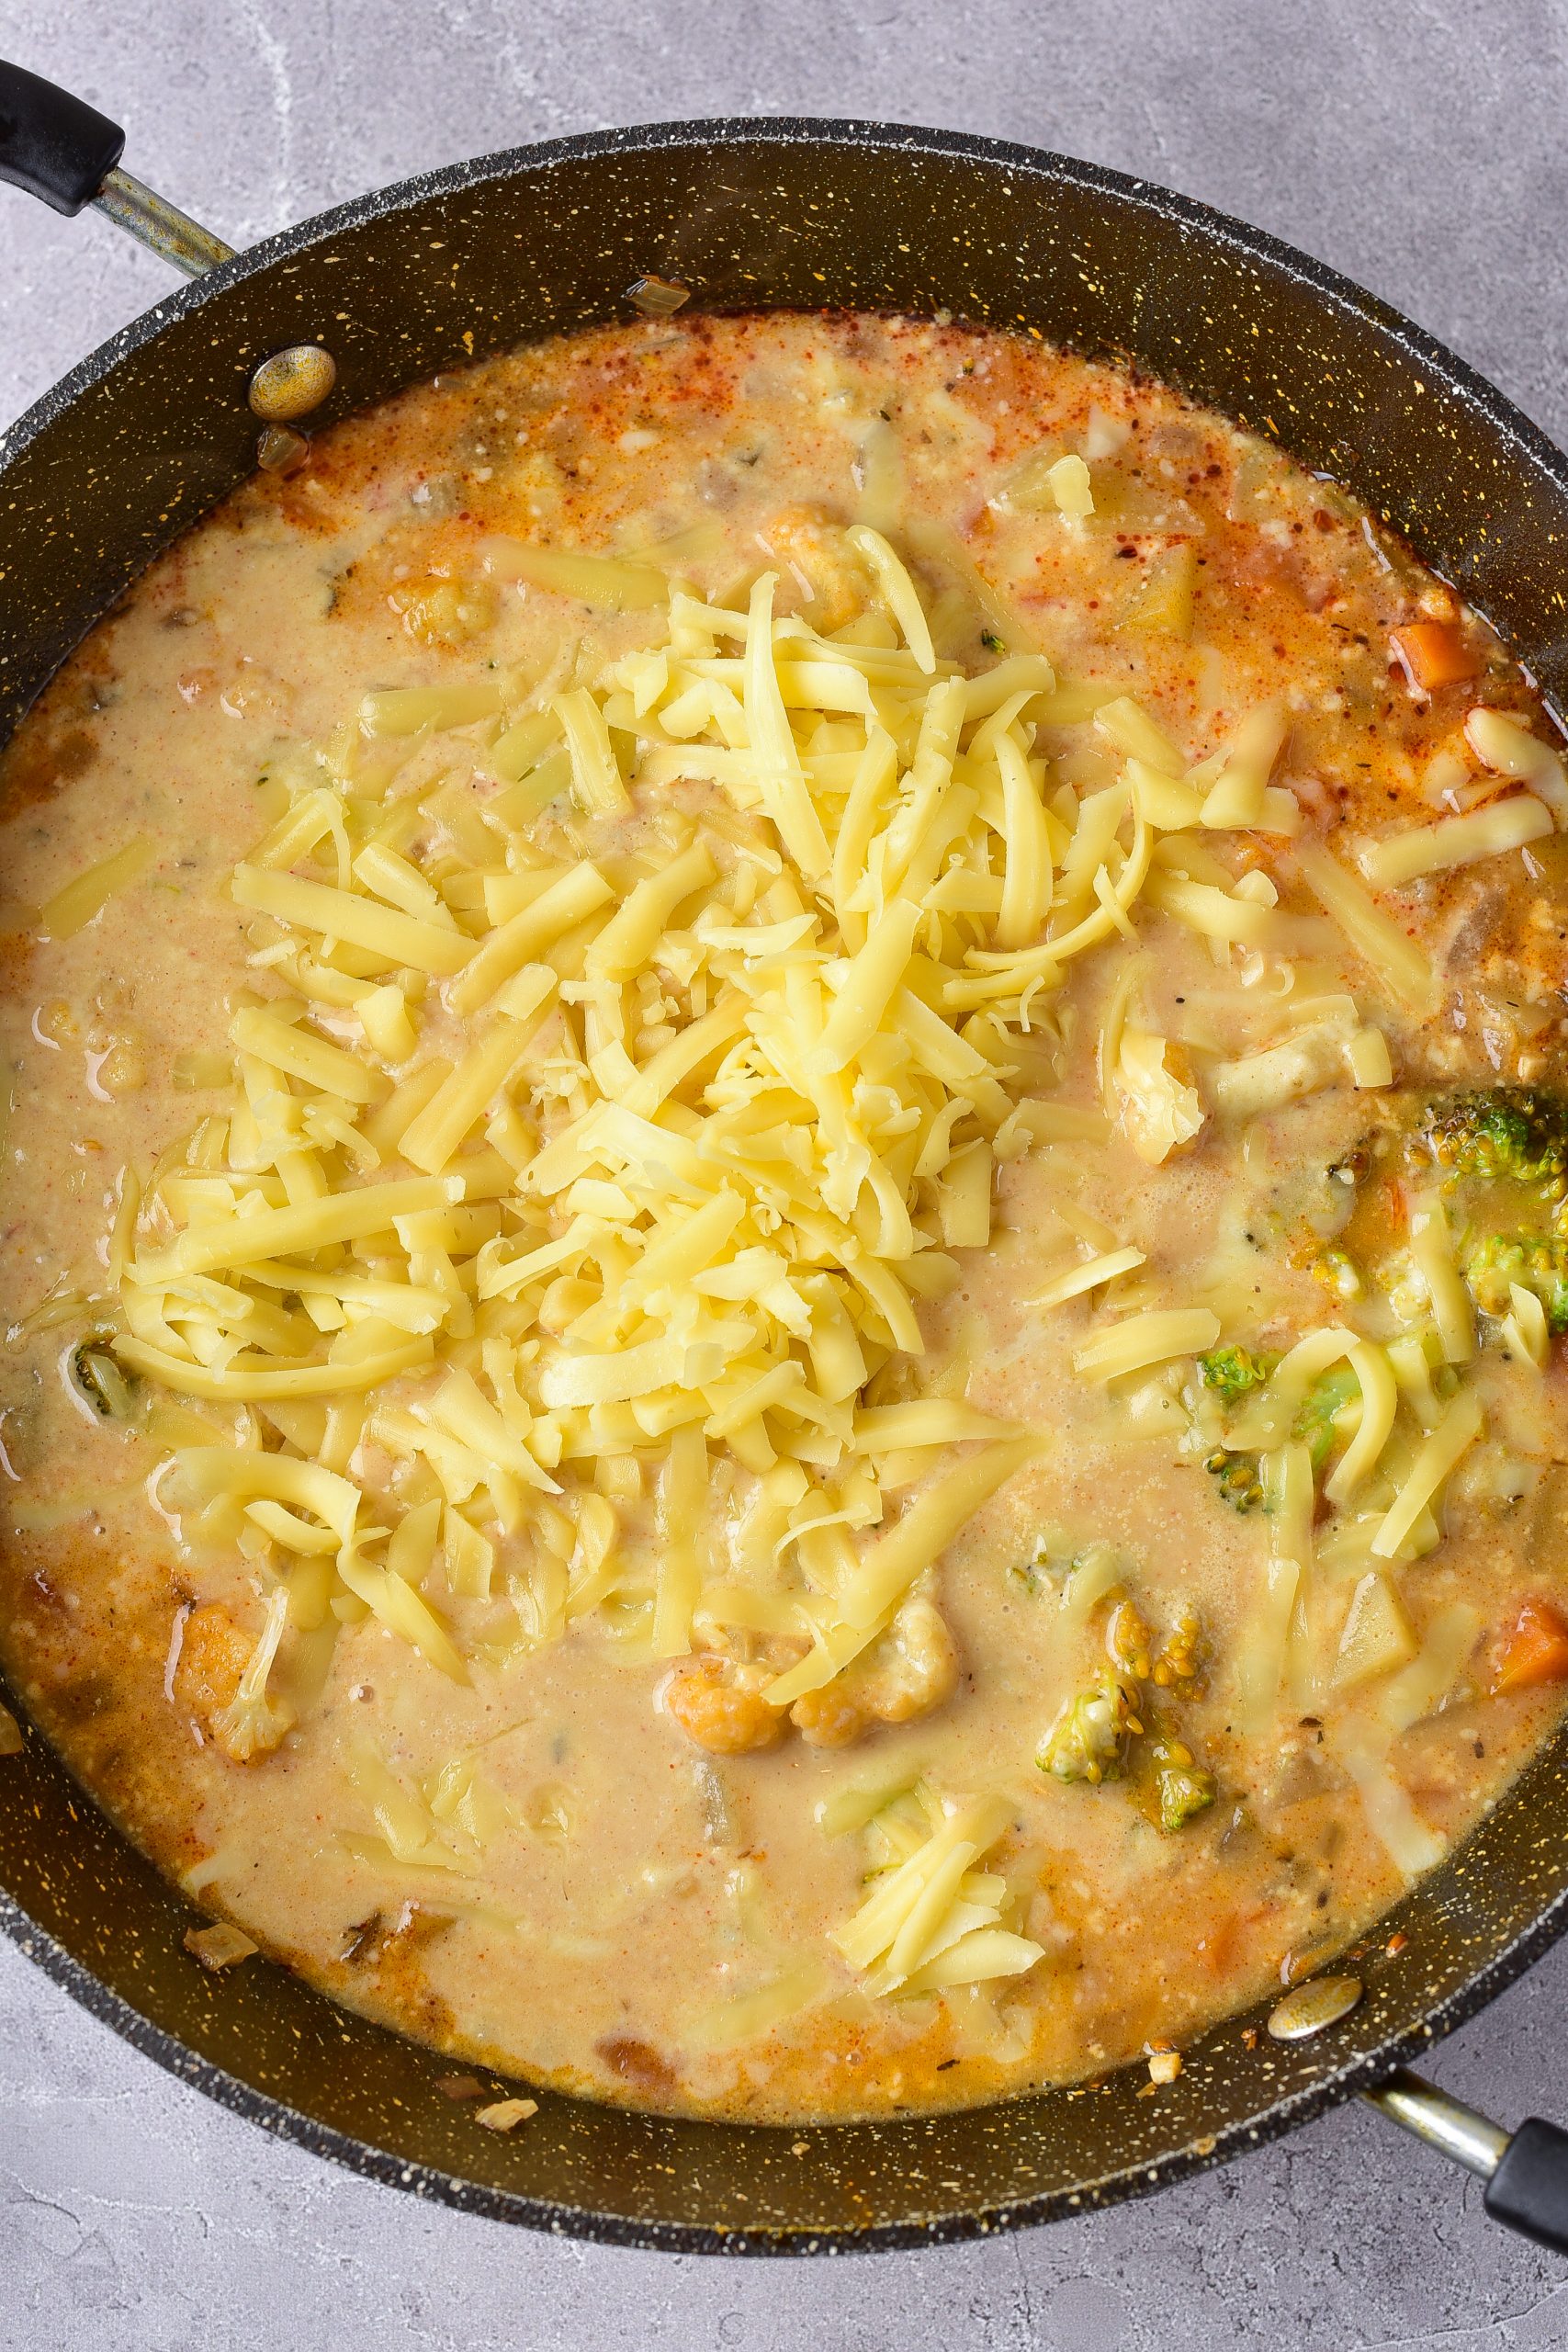 Sprinkle in the cheese, and stir until the cheese has melted before serving. 